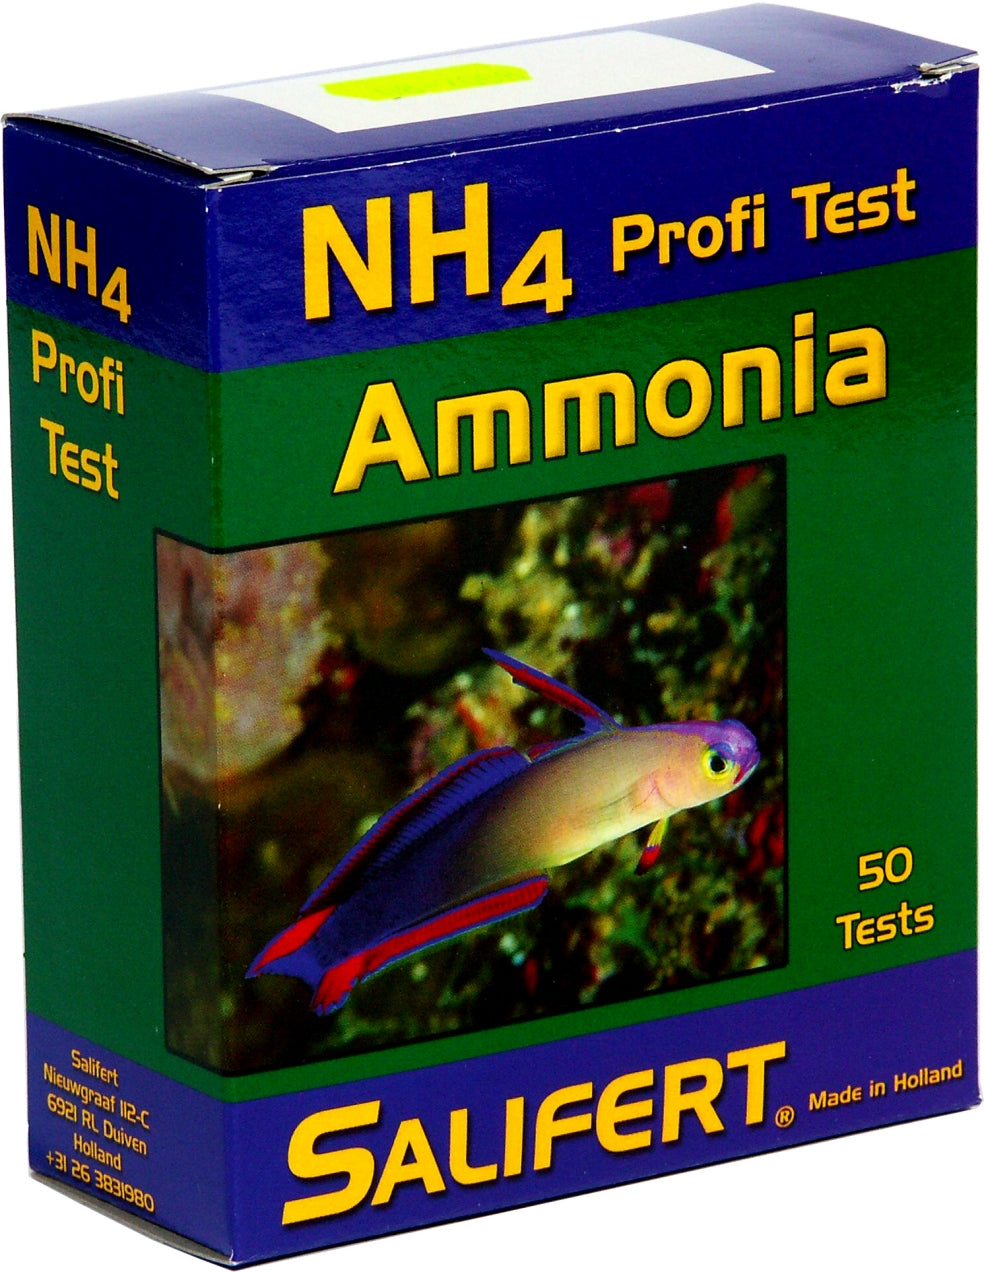 Salifert Ammonia NH4 Profi test available at Coral Passion in Essex